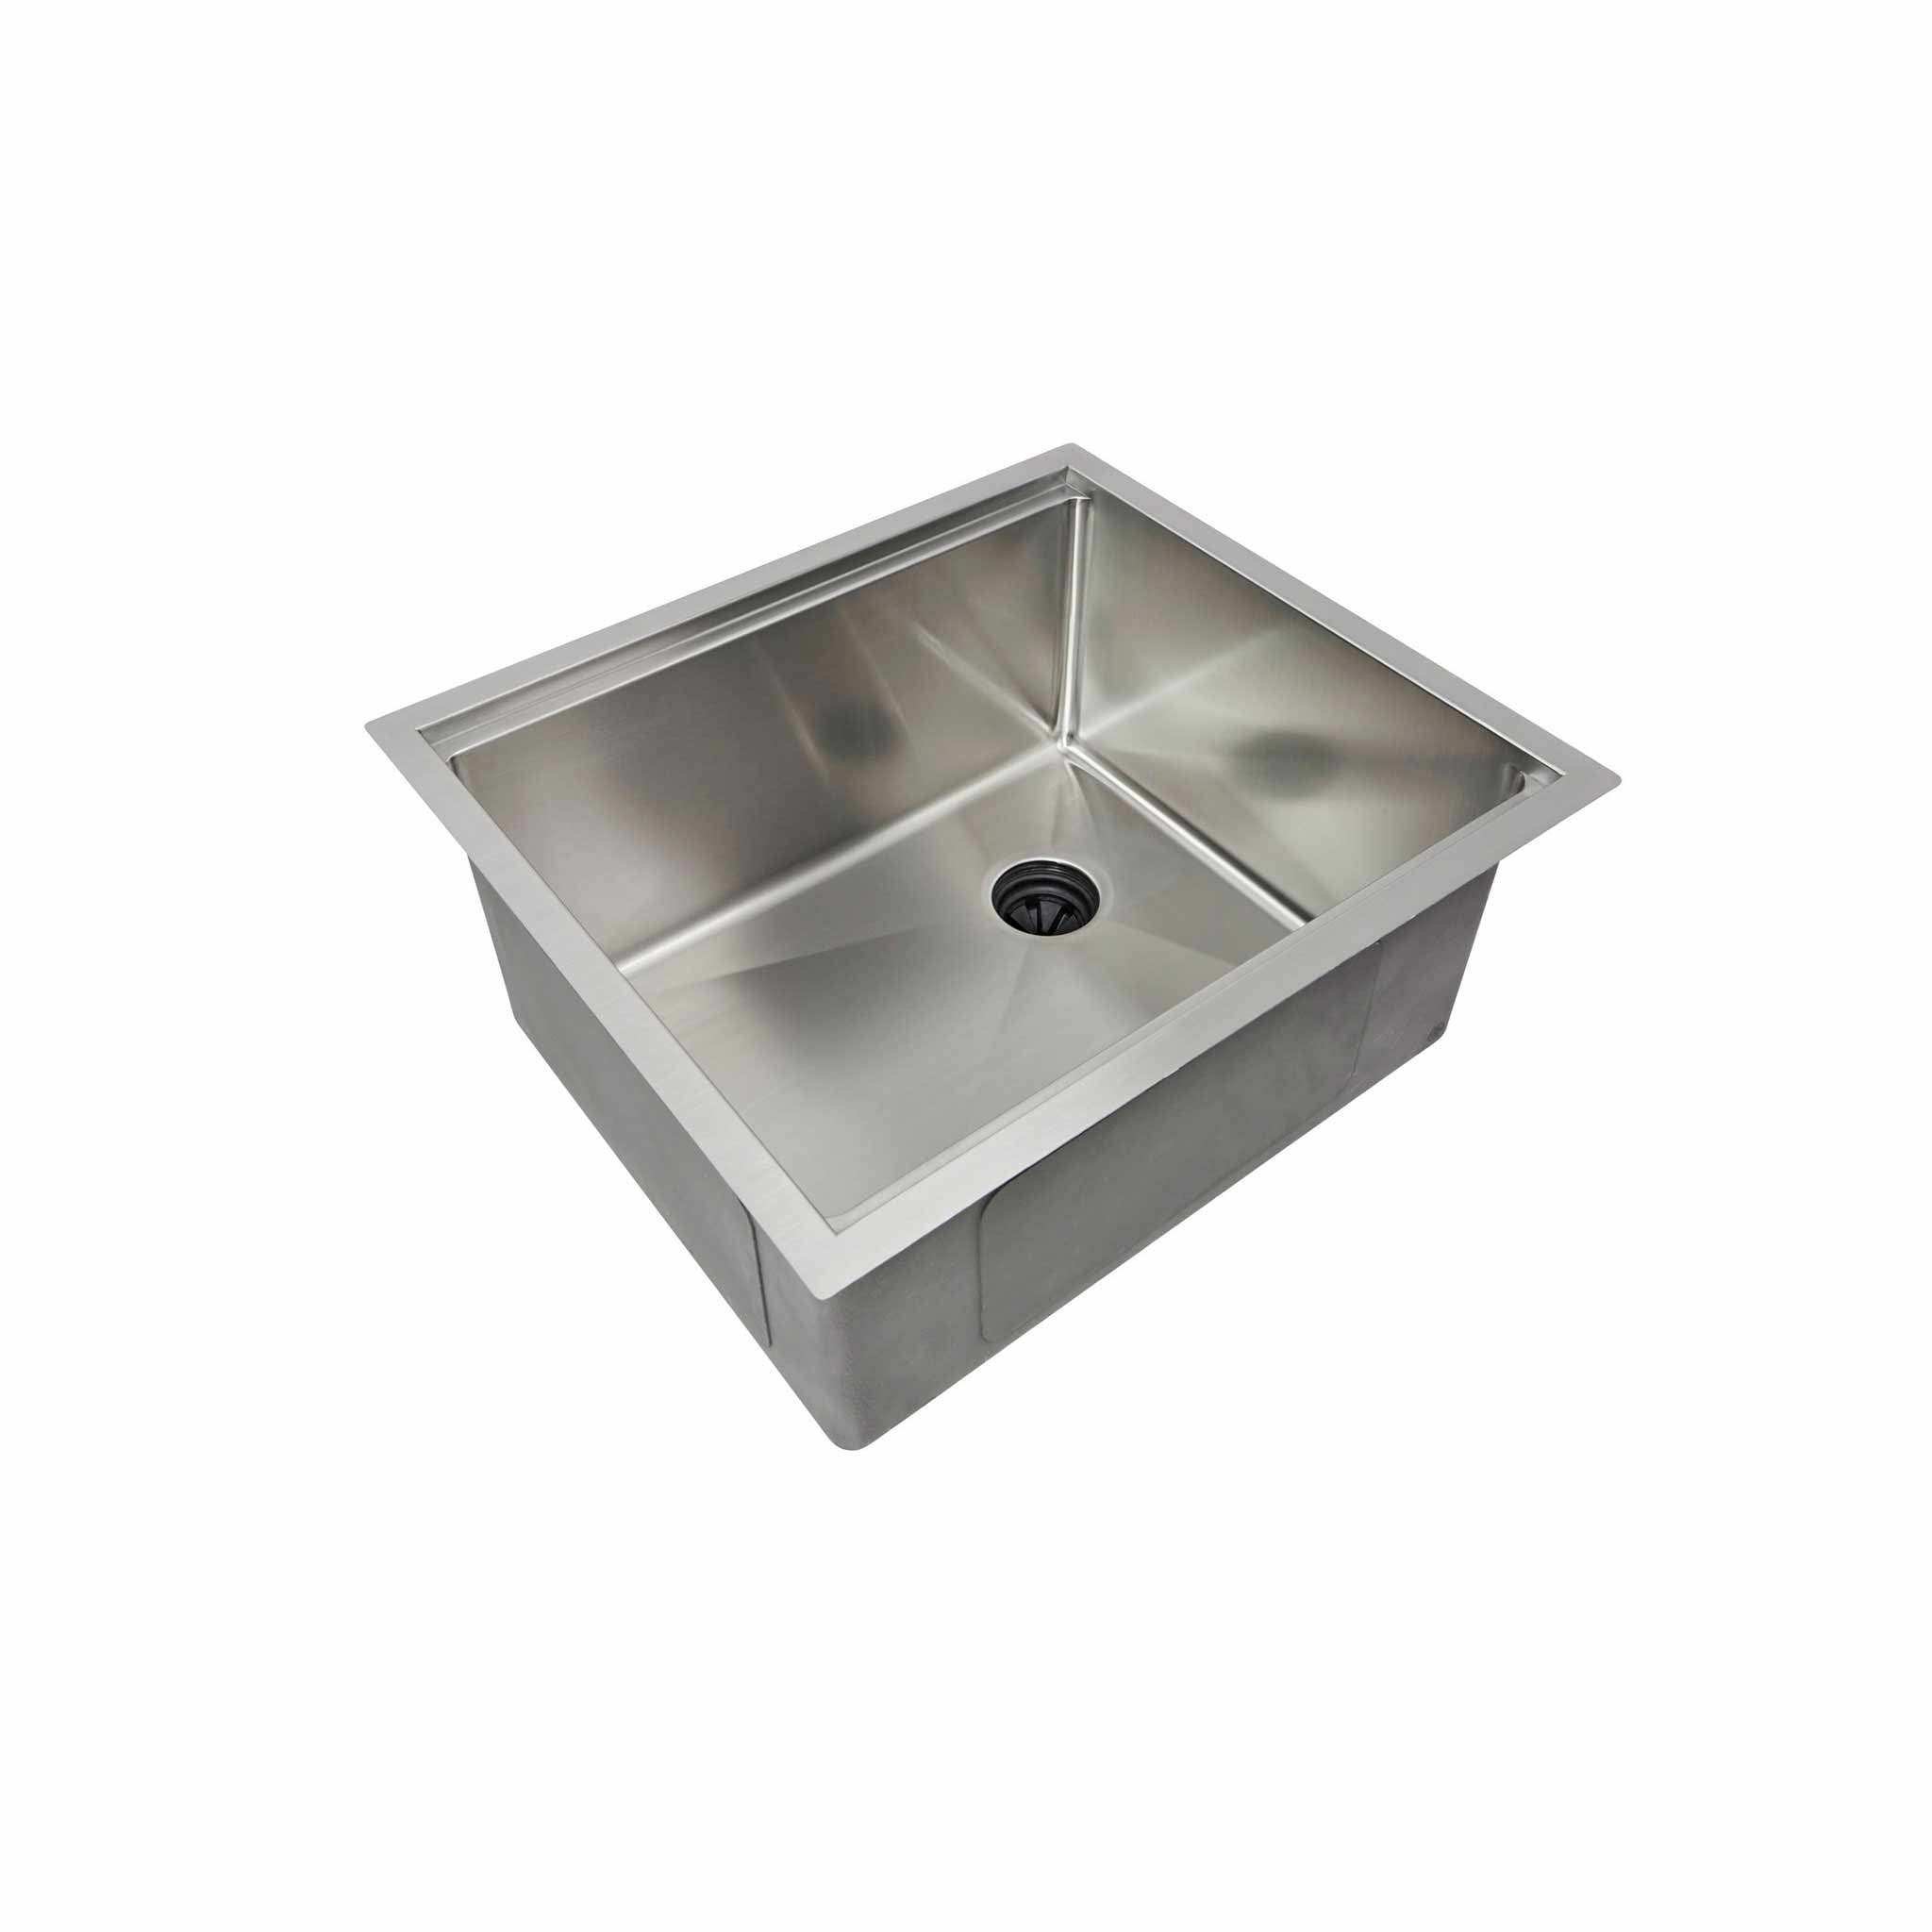 22”, stainless steel, workstation prep sink with the patented seamless drain and half inch radius corners.